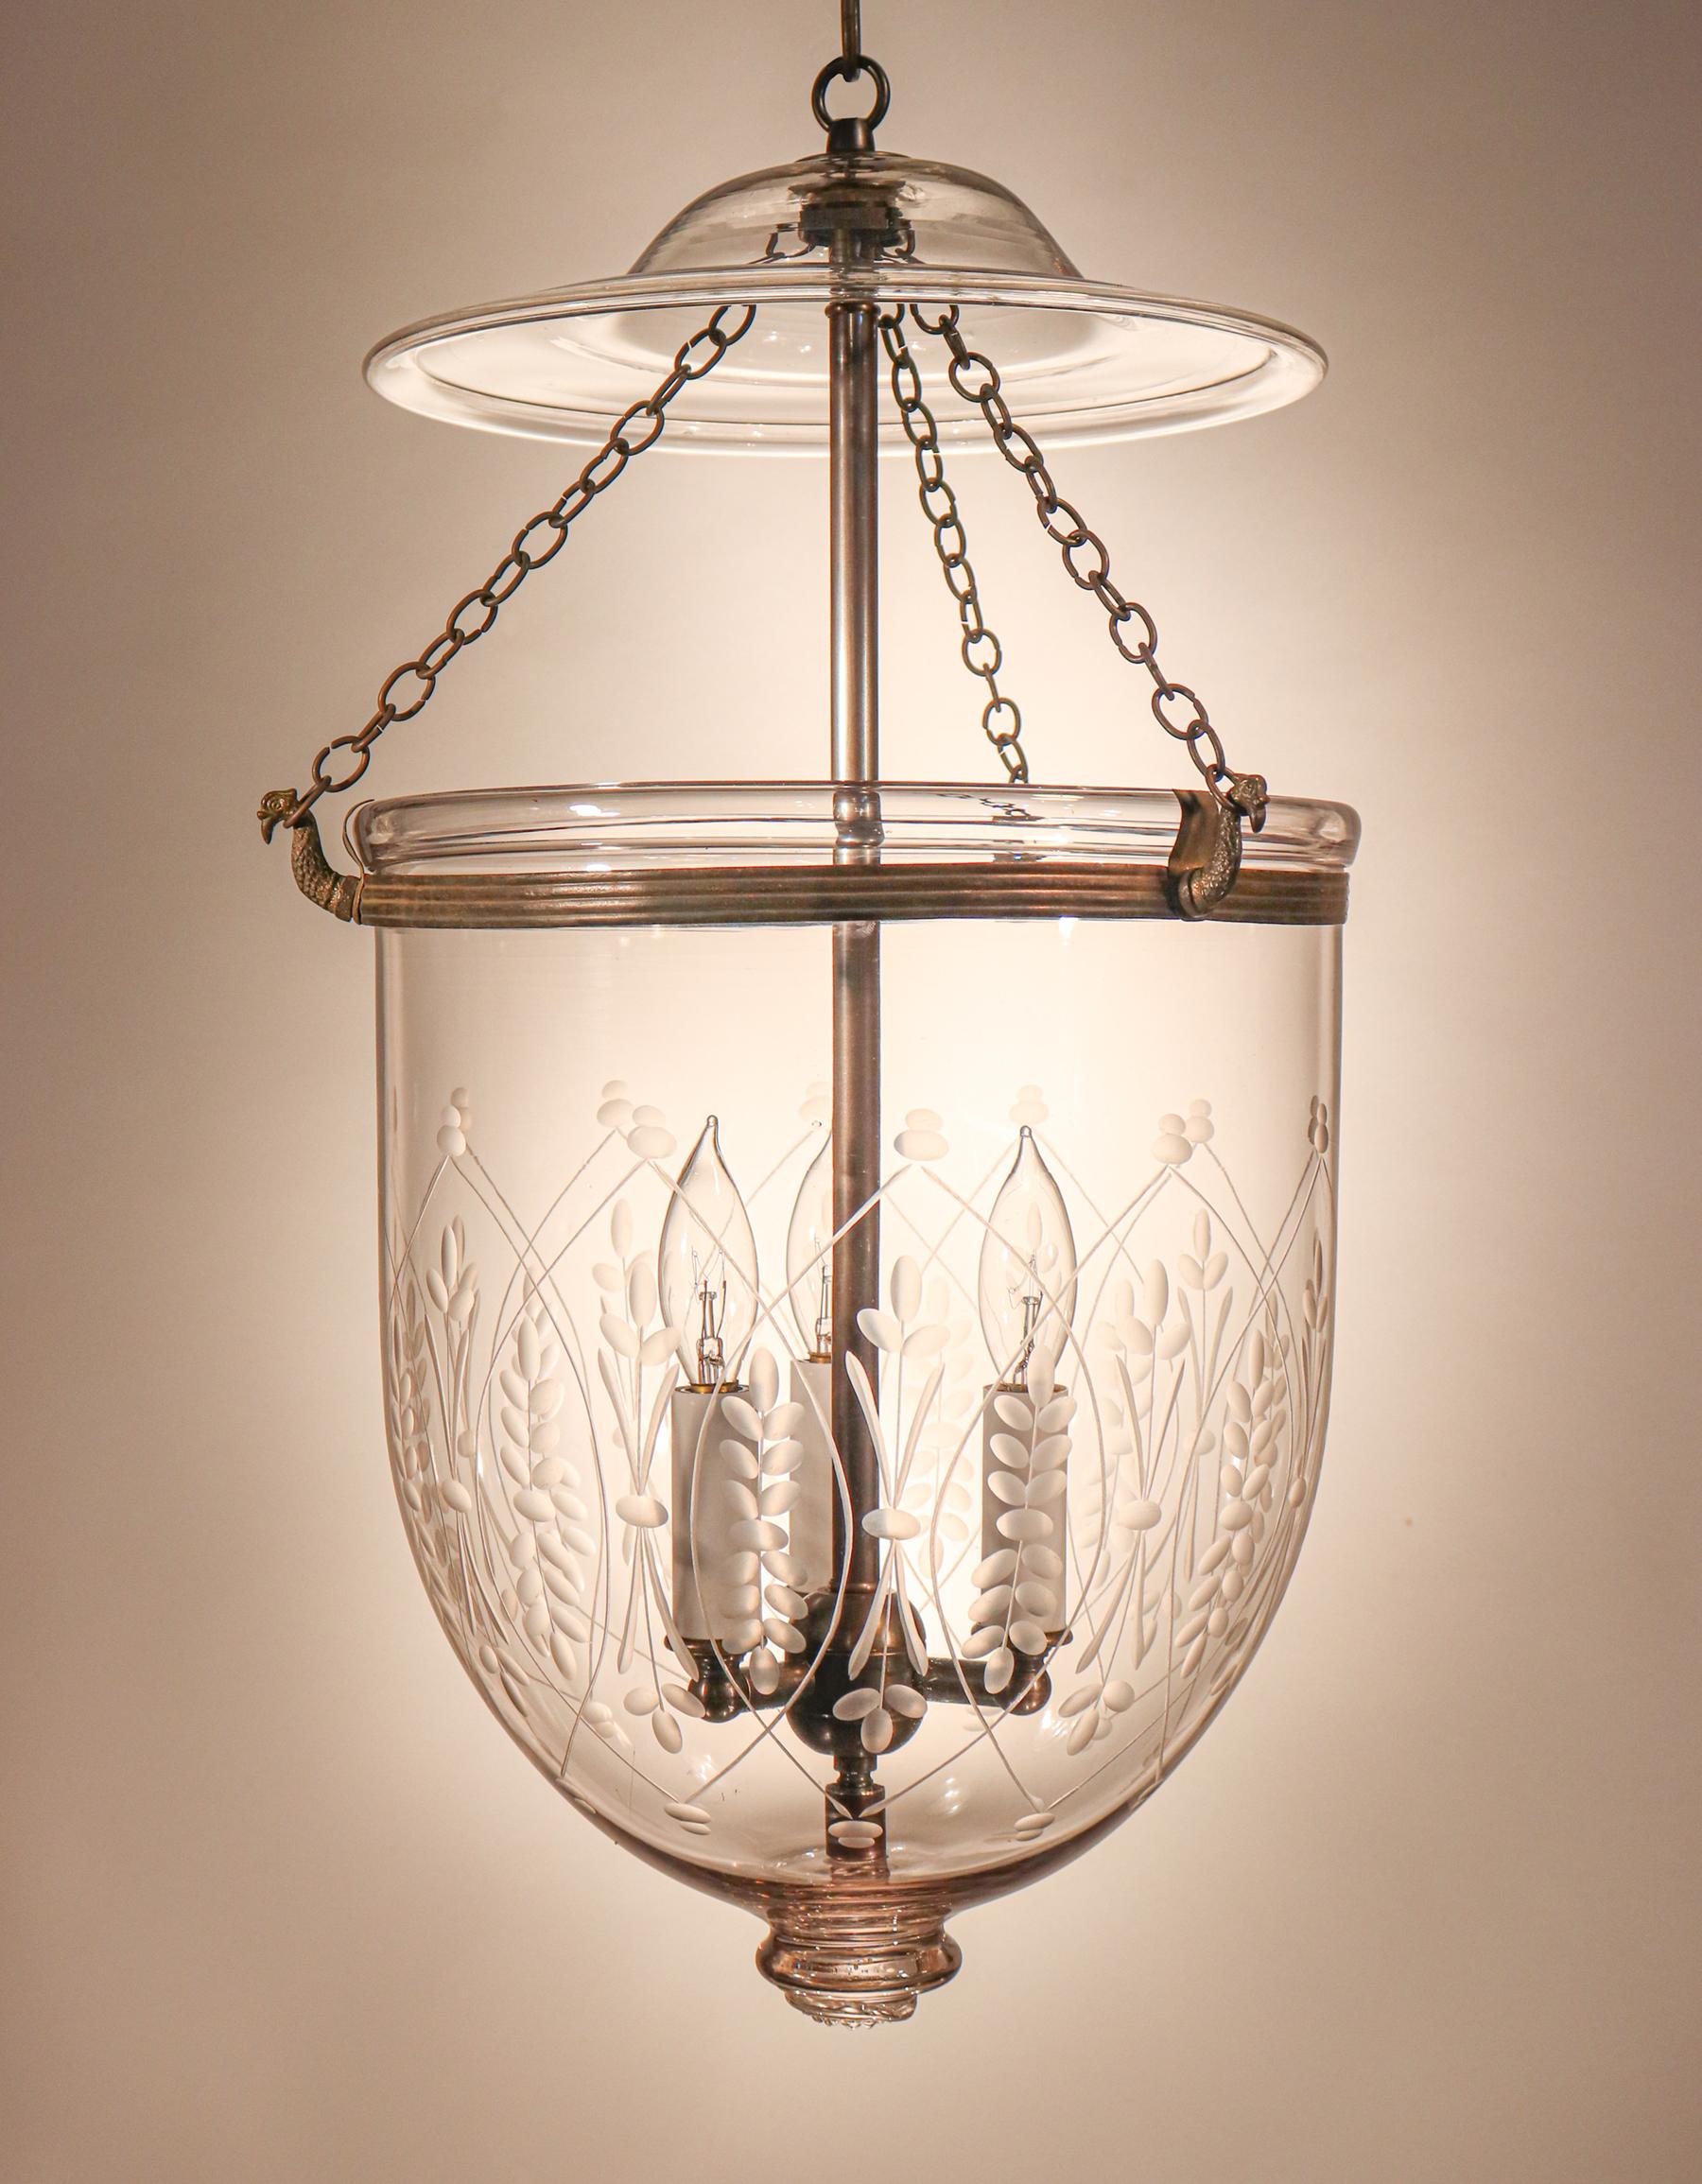 Victorian Antique Bell Jar Lantern with Wheat Etching